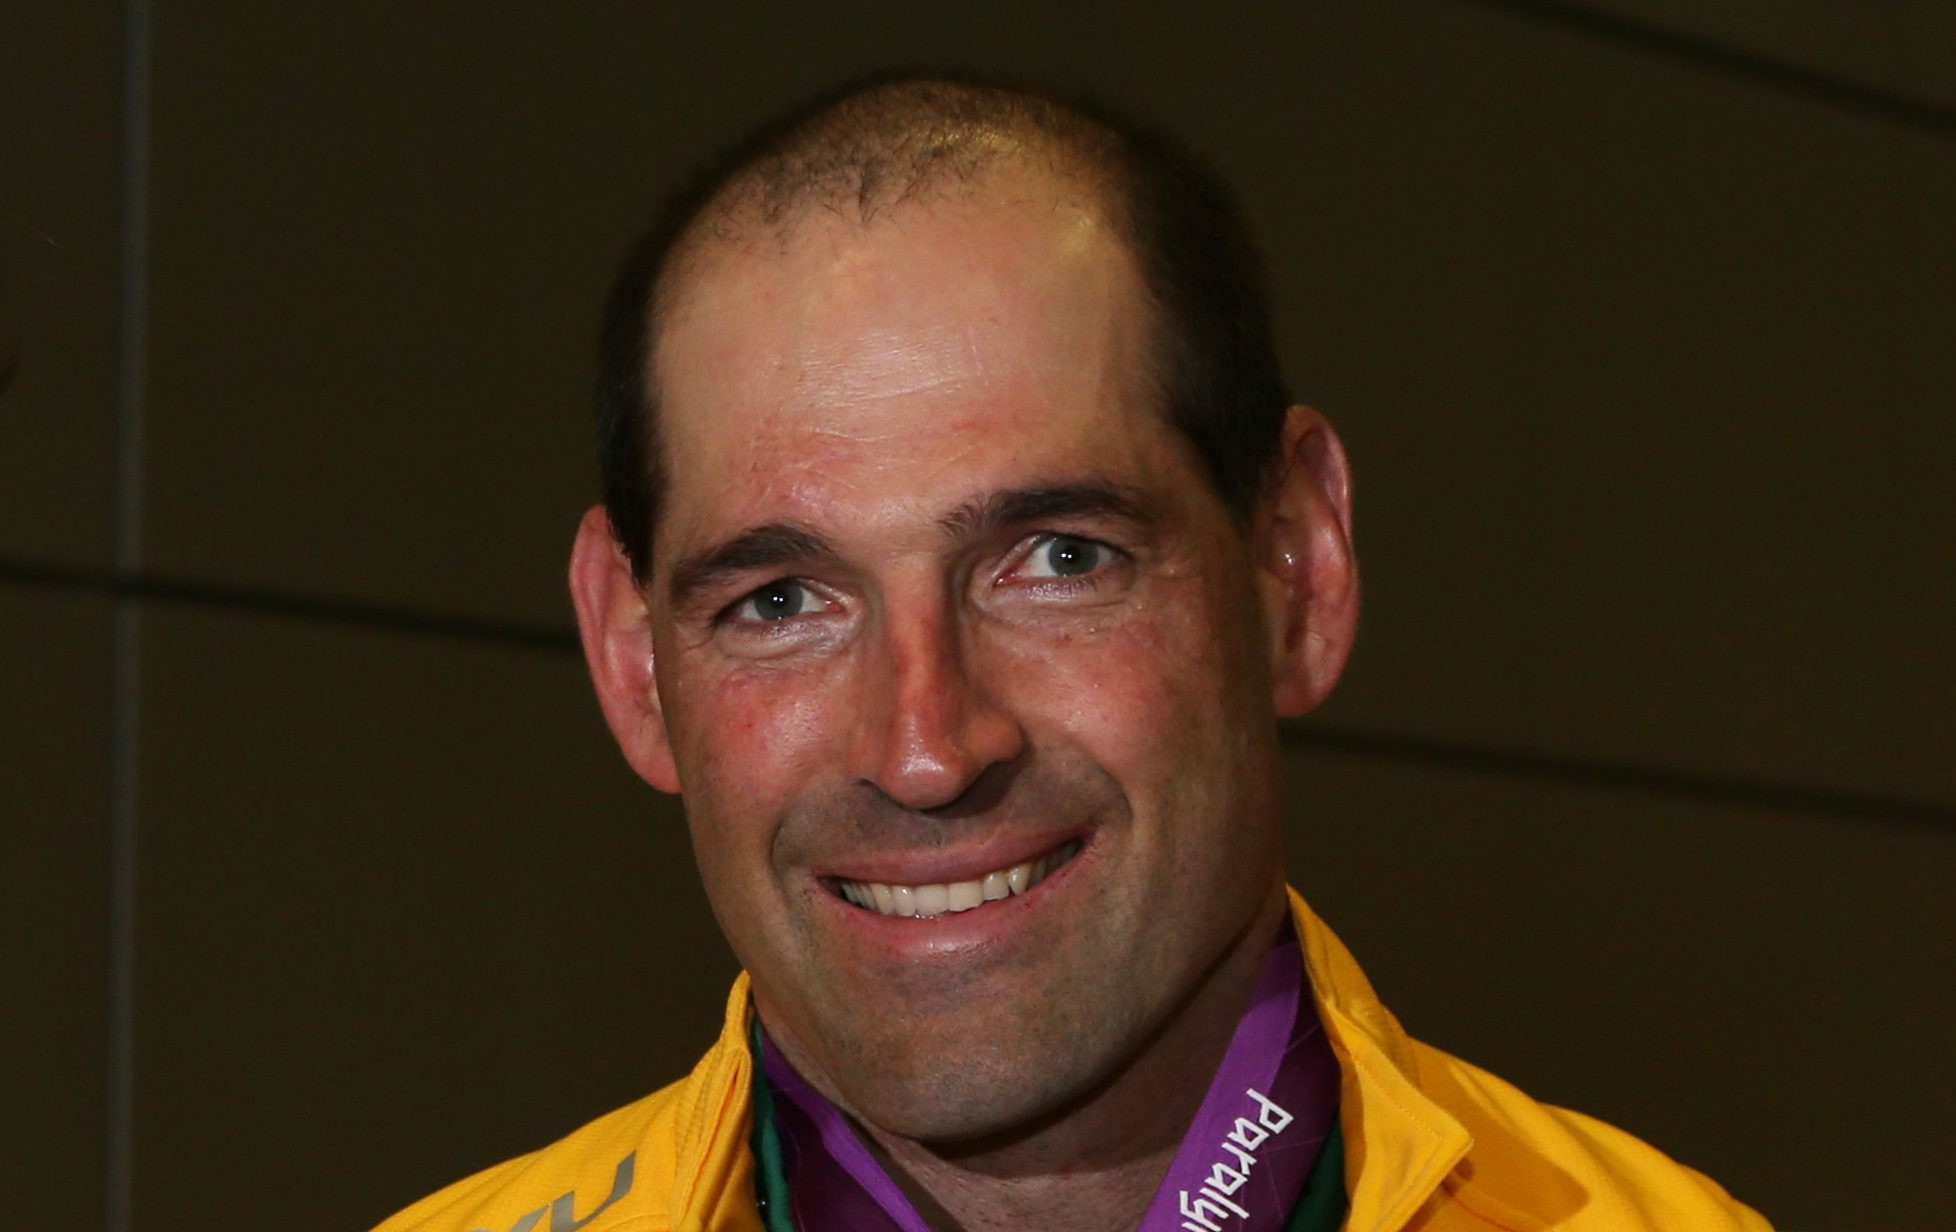 Paralympics Australia is in mourning following the death of legendary eight-time Paralympian Kieran Modra ©Paralympics Australia